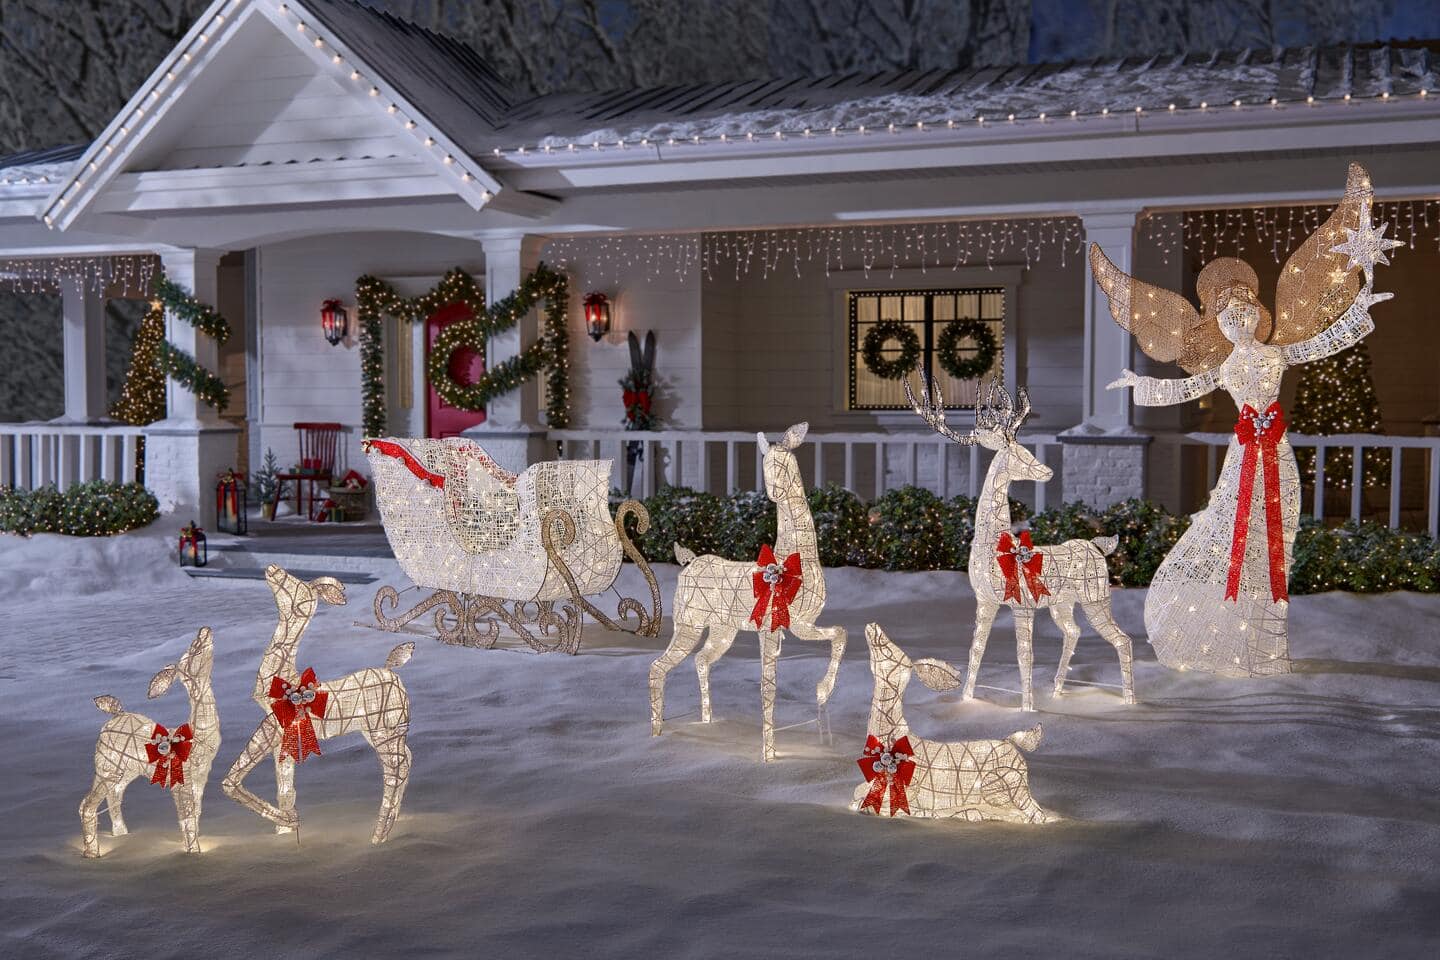 Top 10 Tips and Safety Warnings: Holliday Roof Top Decorations -